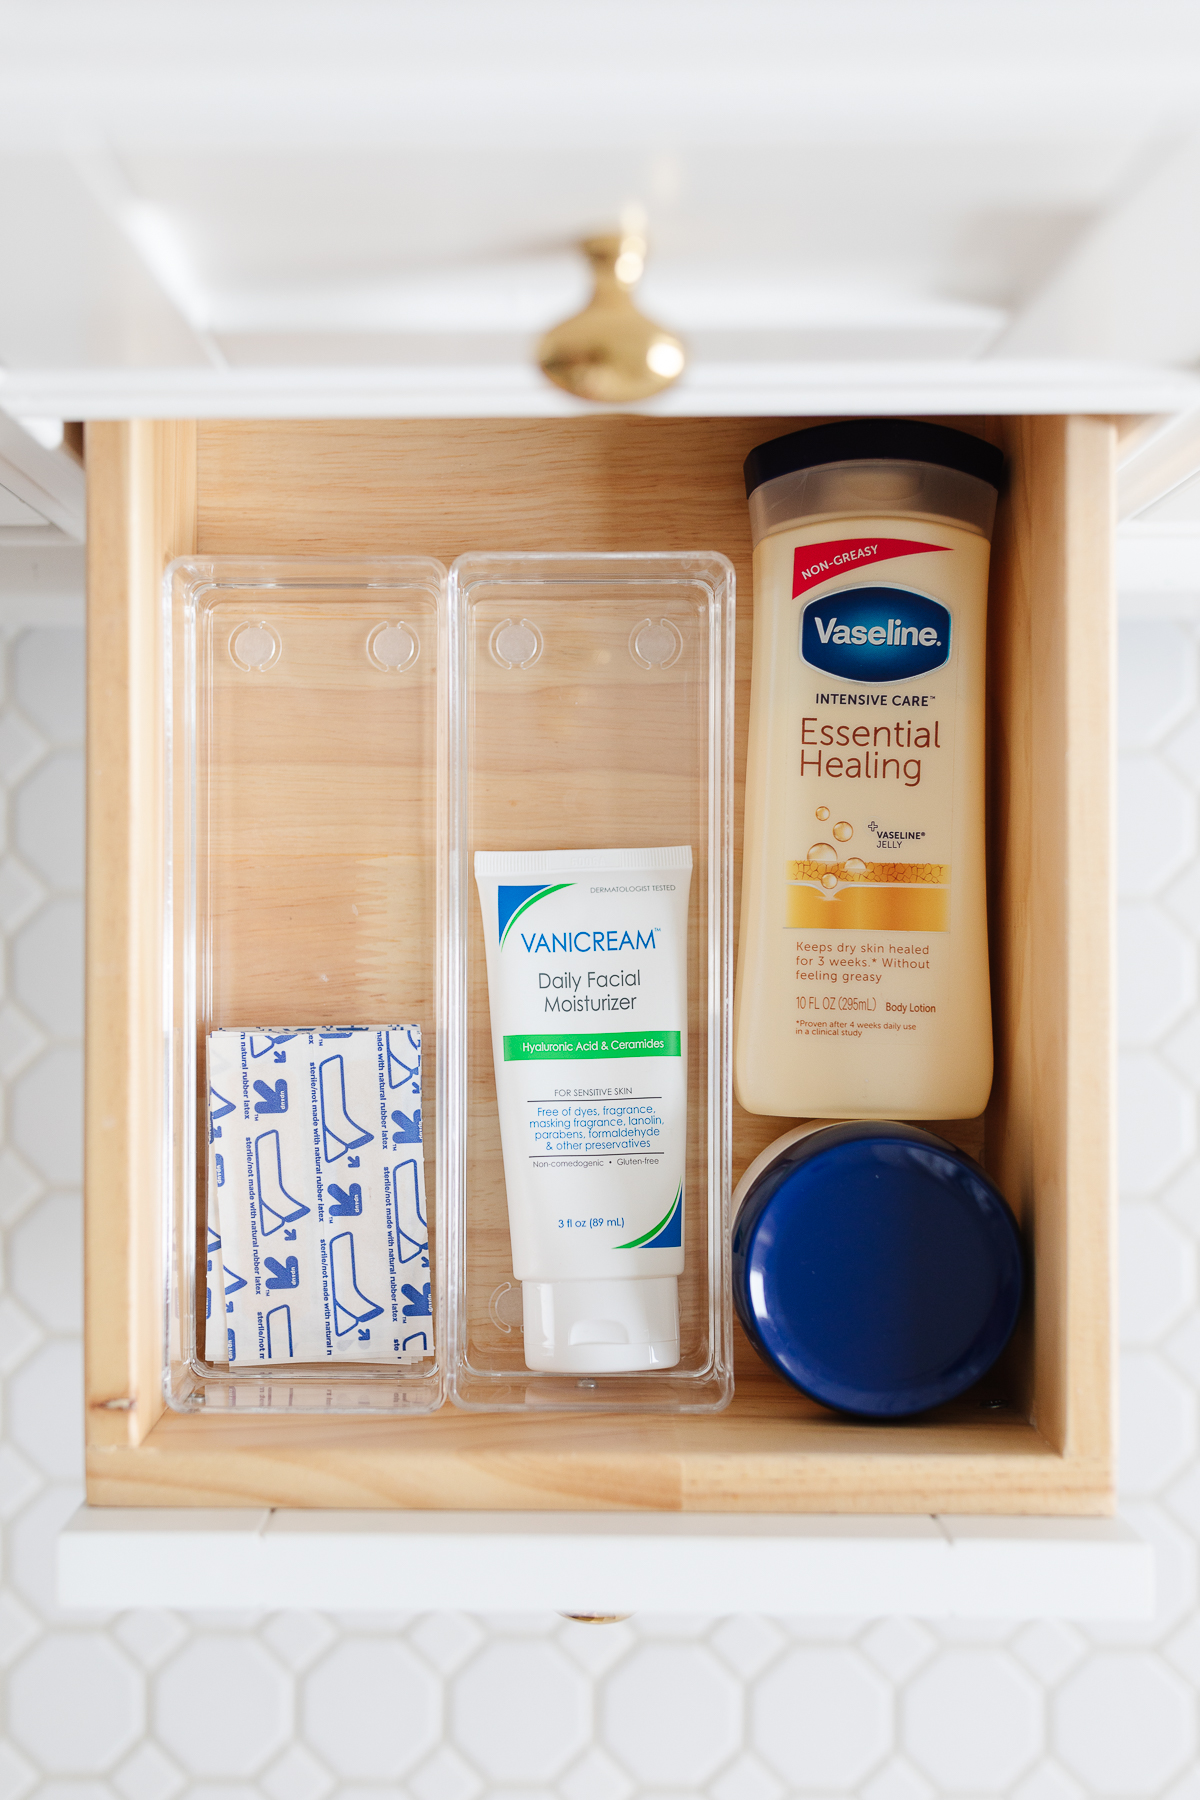 A bathroom drawer with a convenient drawer organizer for toiletries.